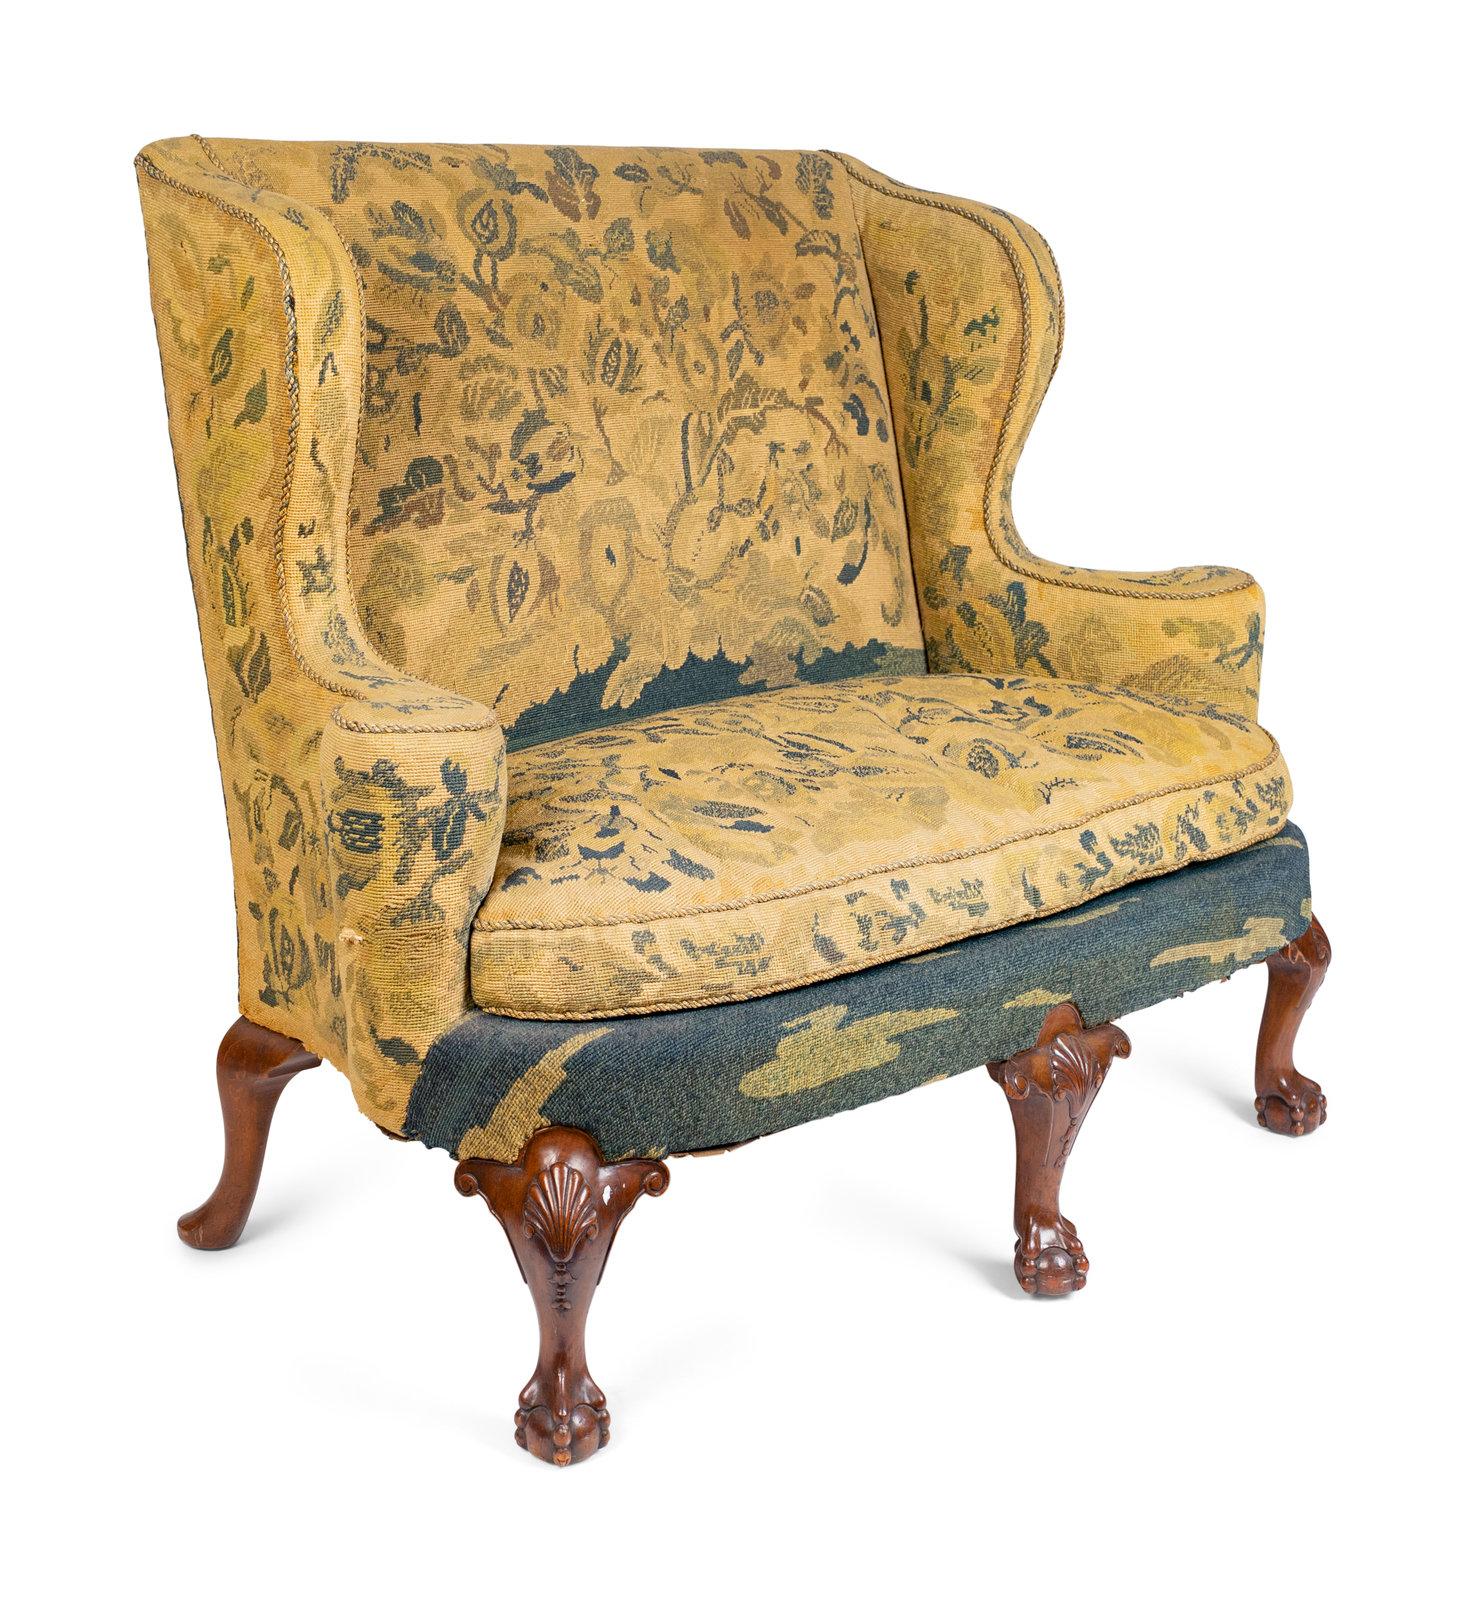 Pair of George II style carved walnut settees, upholstered in petit point needlework, 19th century
Property from Mar-a-Lago, Christie's, New York, NY, sale 8140, lot 136